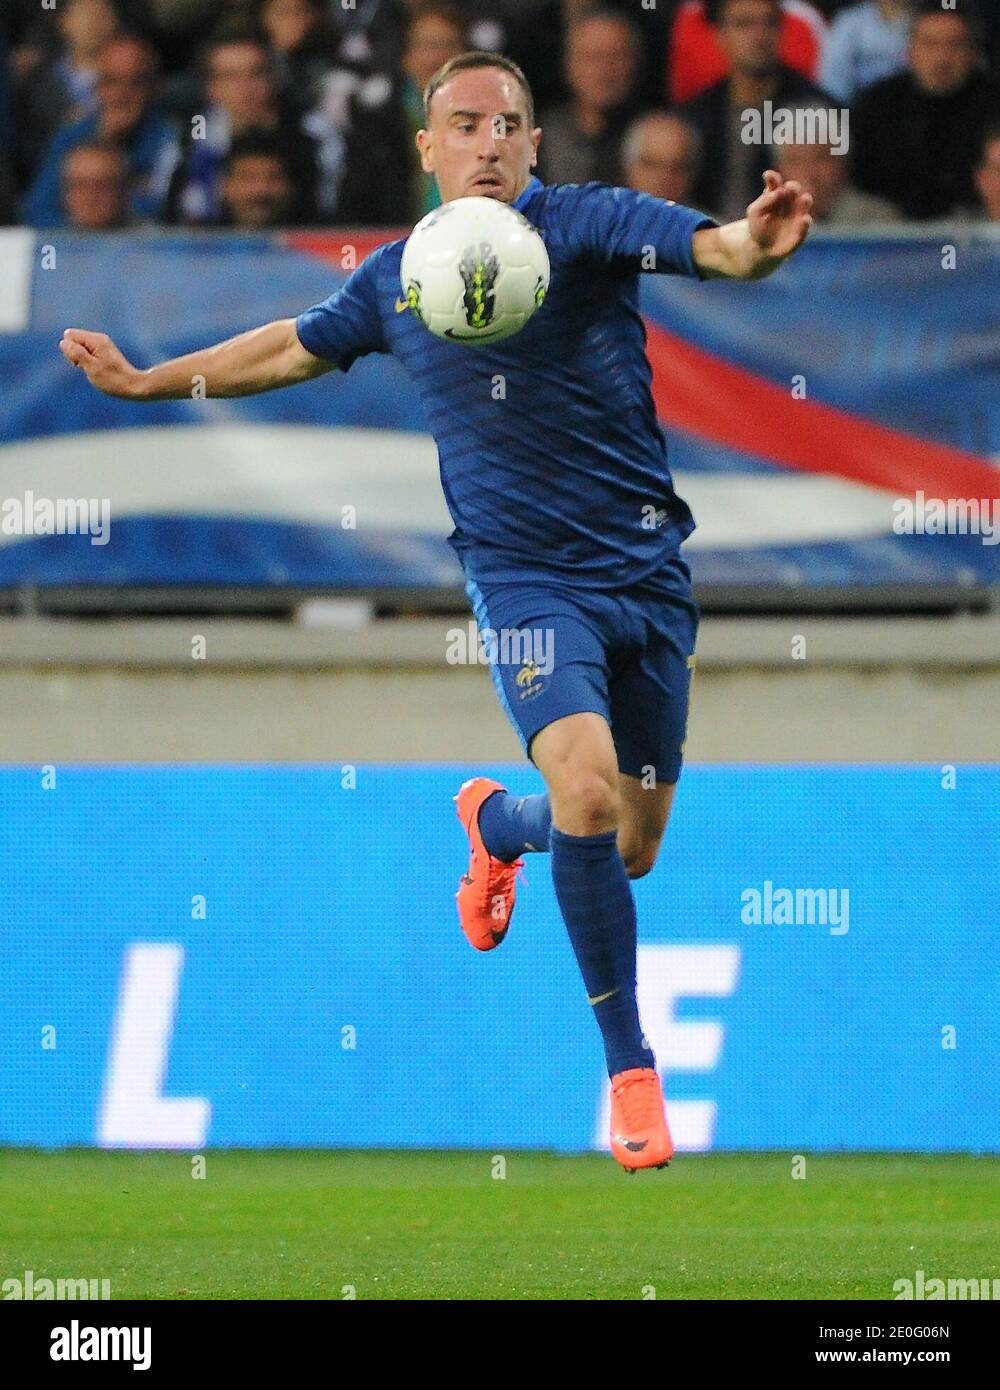 France's Franck Ribery during an International Friendly soccer match, France Vs Estonia at MMArena stadium in Le Mans, France, on June 5, 2012. France won 4-0. Photo by ABACAPRESS.COM Stock Photo